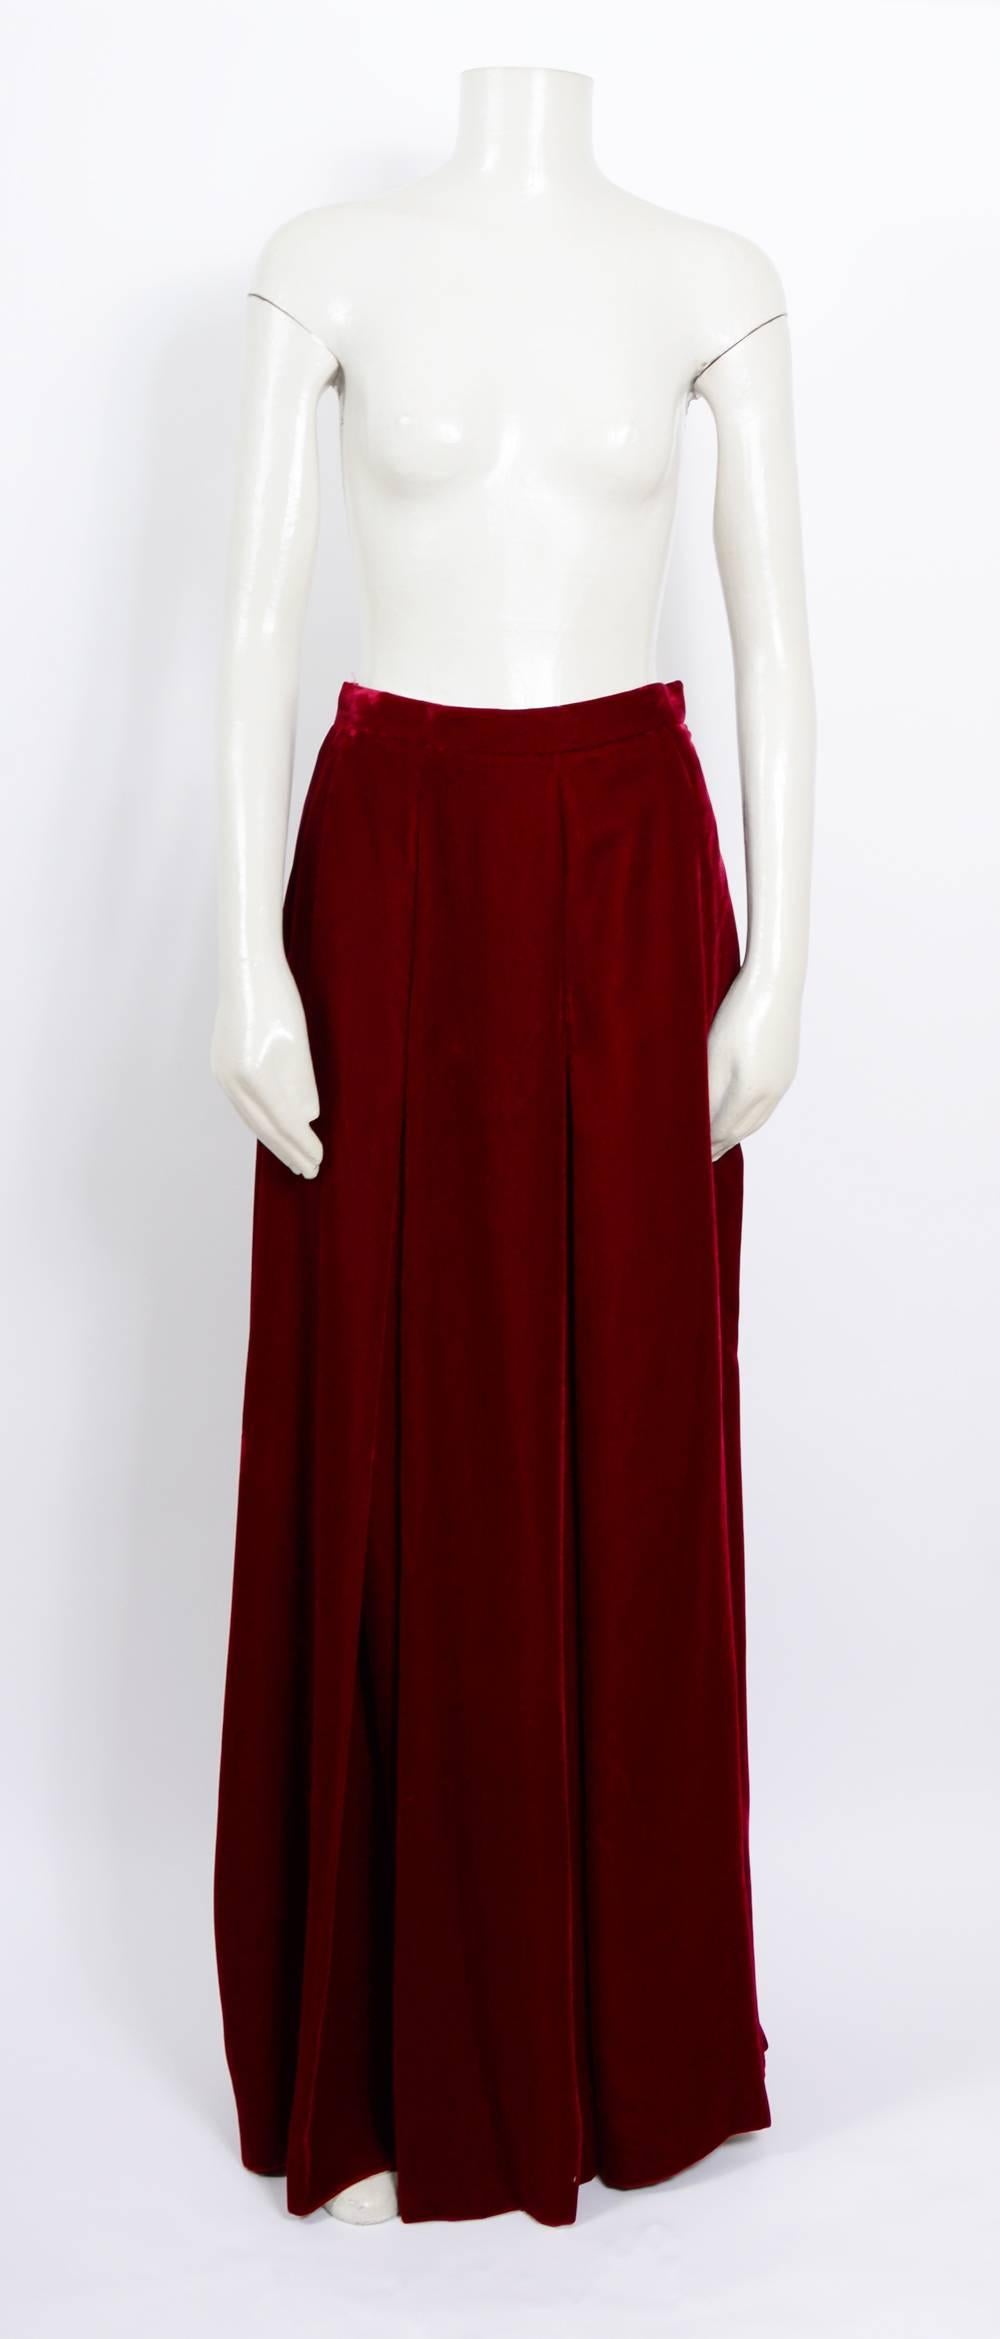 Stunning!!! Ruby red soft velvet pleated Long Yves Saint Laurent 70's Boho Full Swing Skirt.
Unworn with tags still attached.
French Size 38 
Measurements taken flat: Waist 14inch/36cm - Hips free - Total length  44inch/112cm  